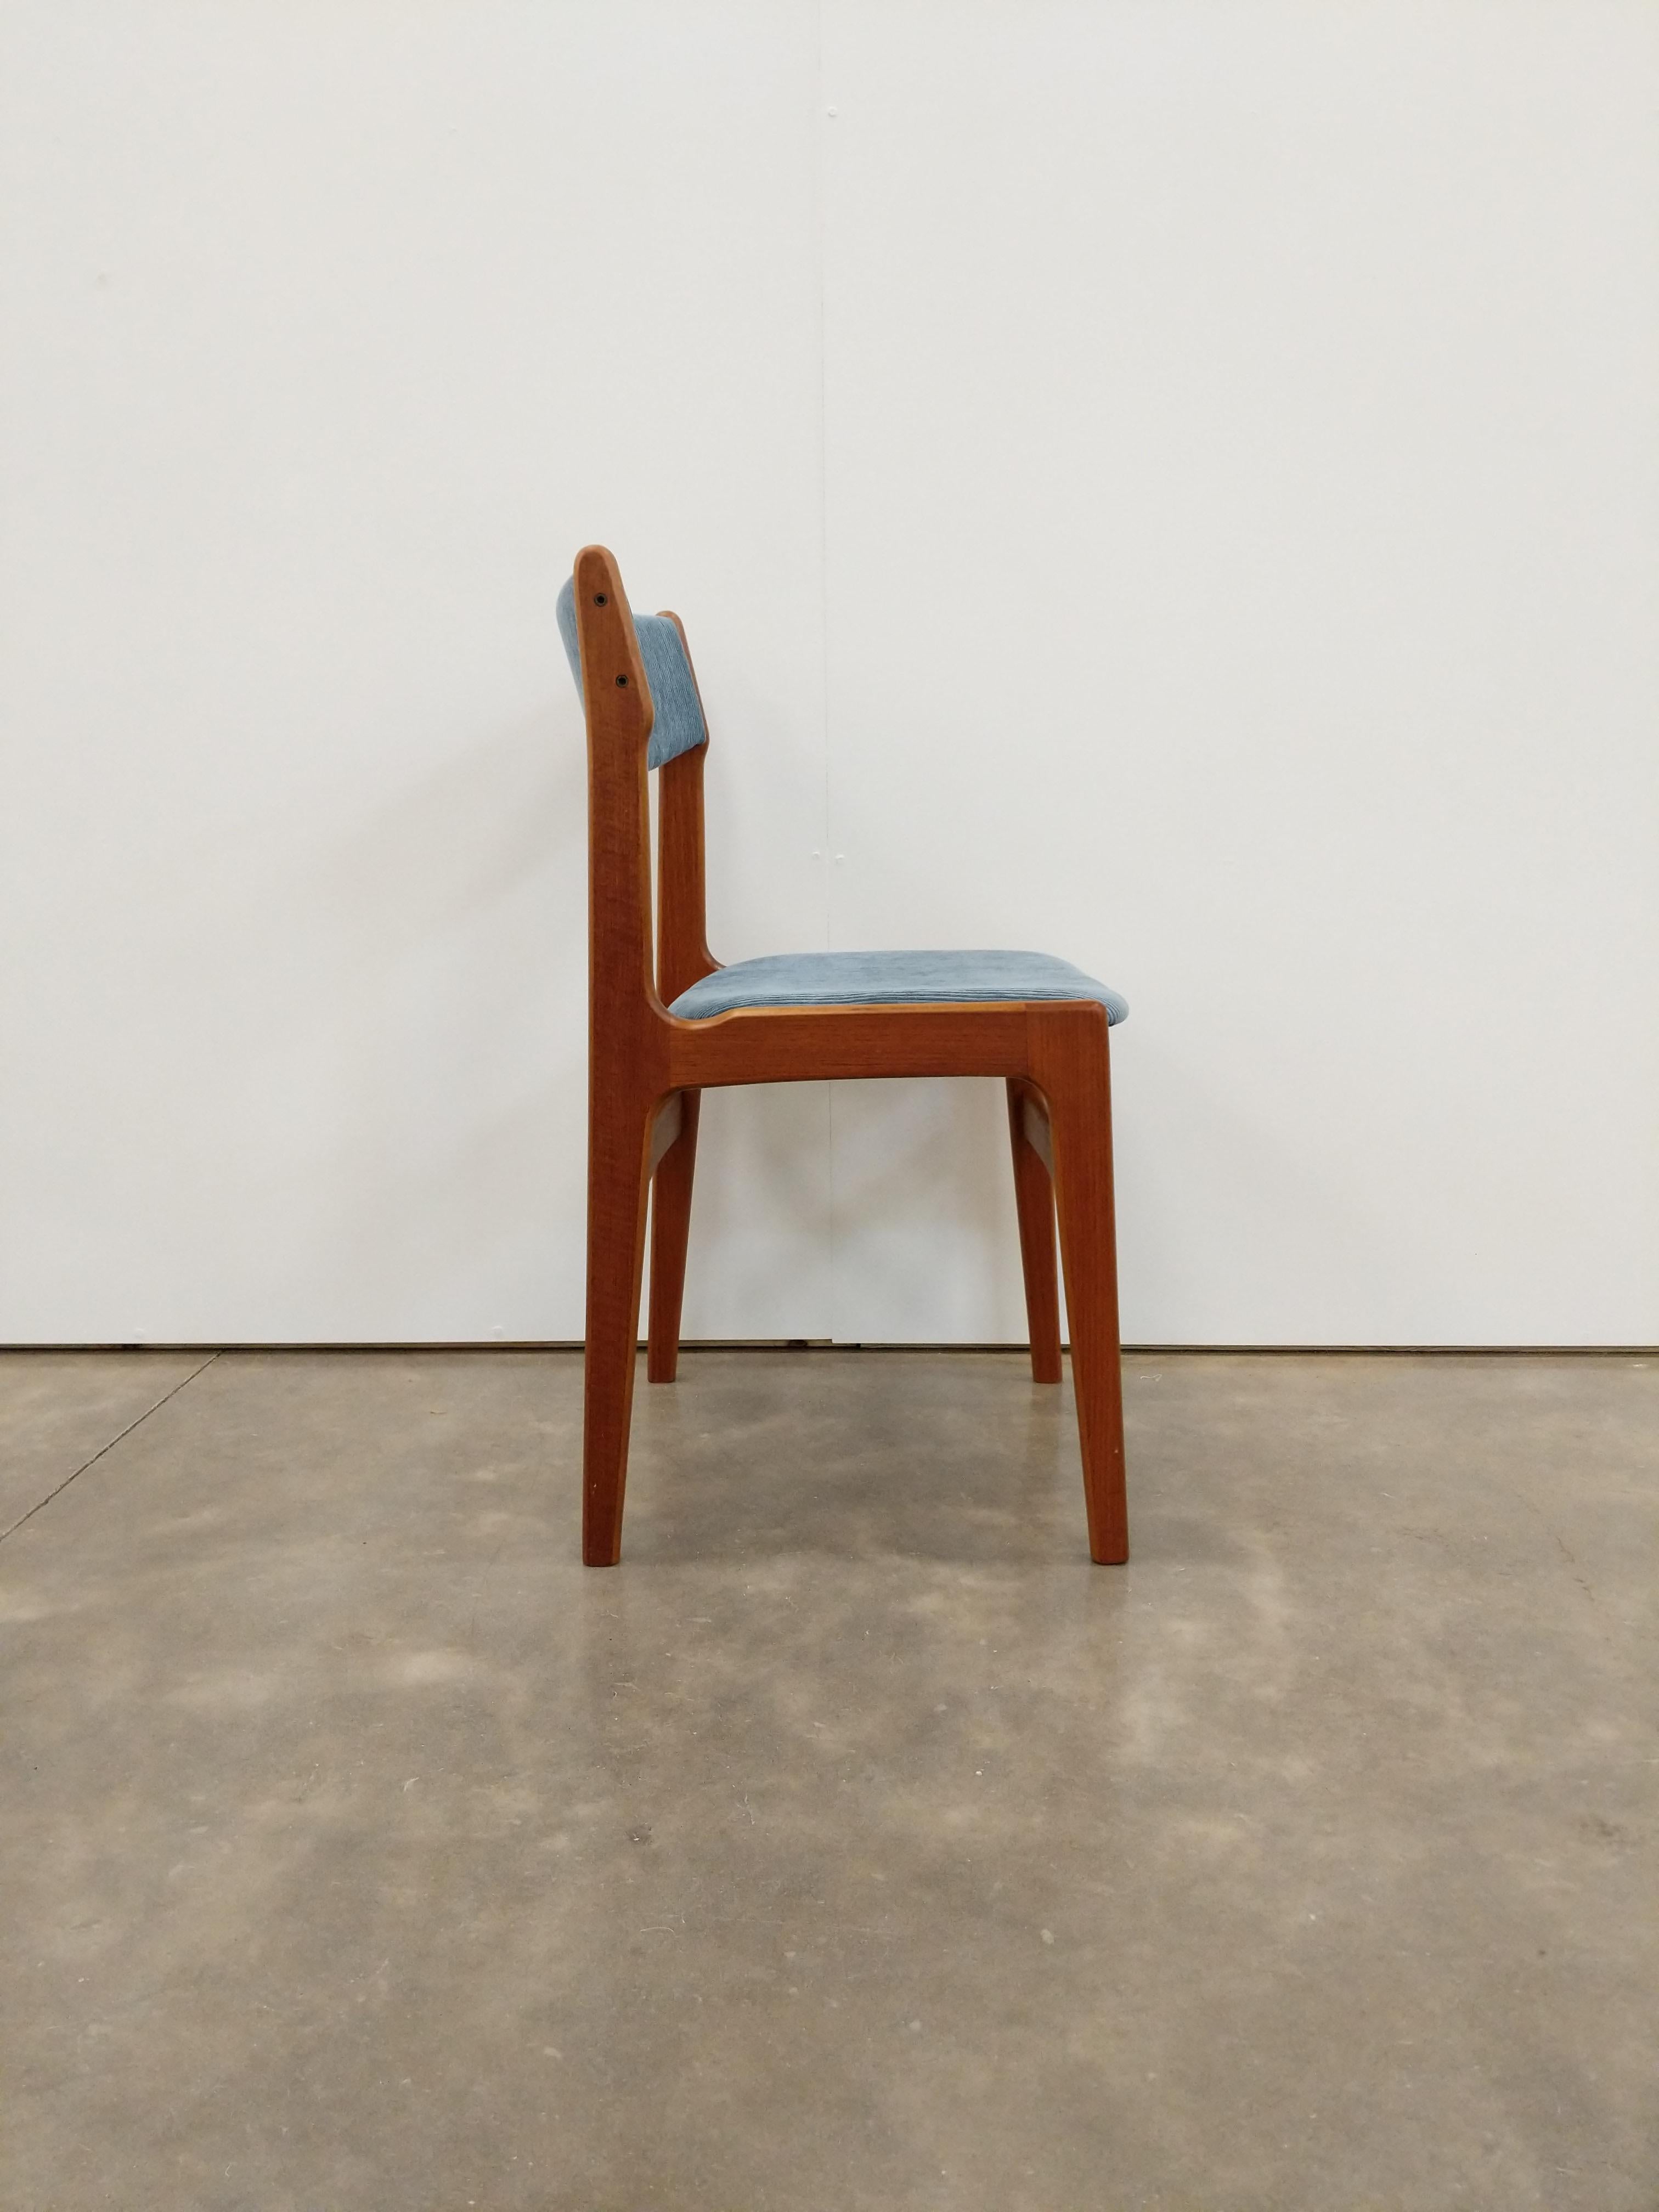 Authentic vintage mid century Danish / Scandinavian Modern dining chair.

Designed by Erik Buch for Anderstrup Møbelfabrik.

This chair is in excellent refurbished condition with brand new Knoll corduroy upholstery (see photos).

If you would like